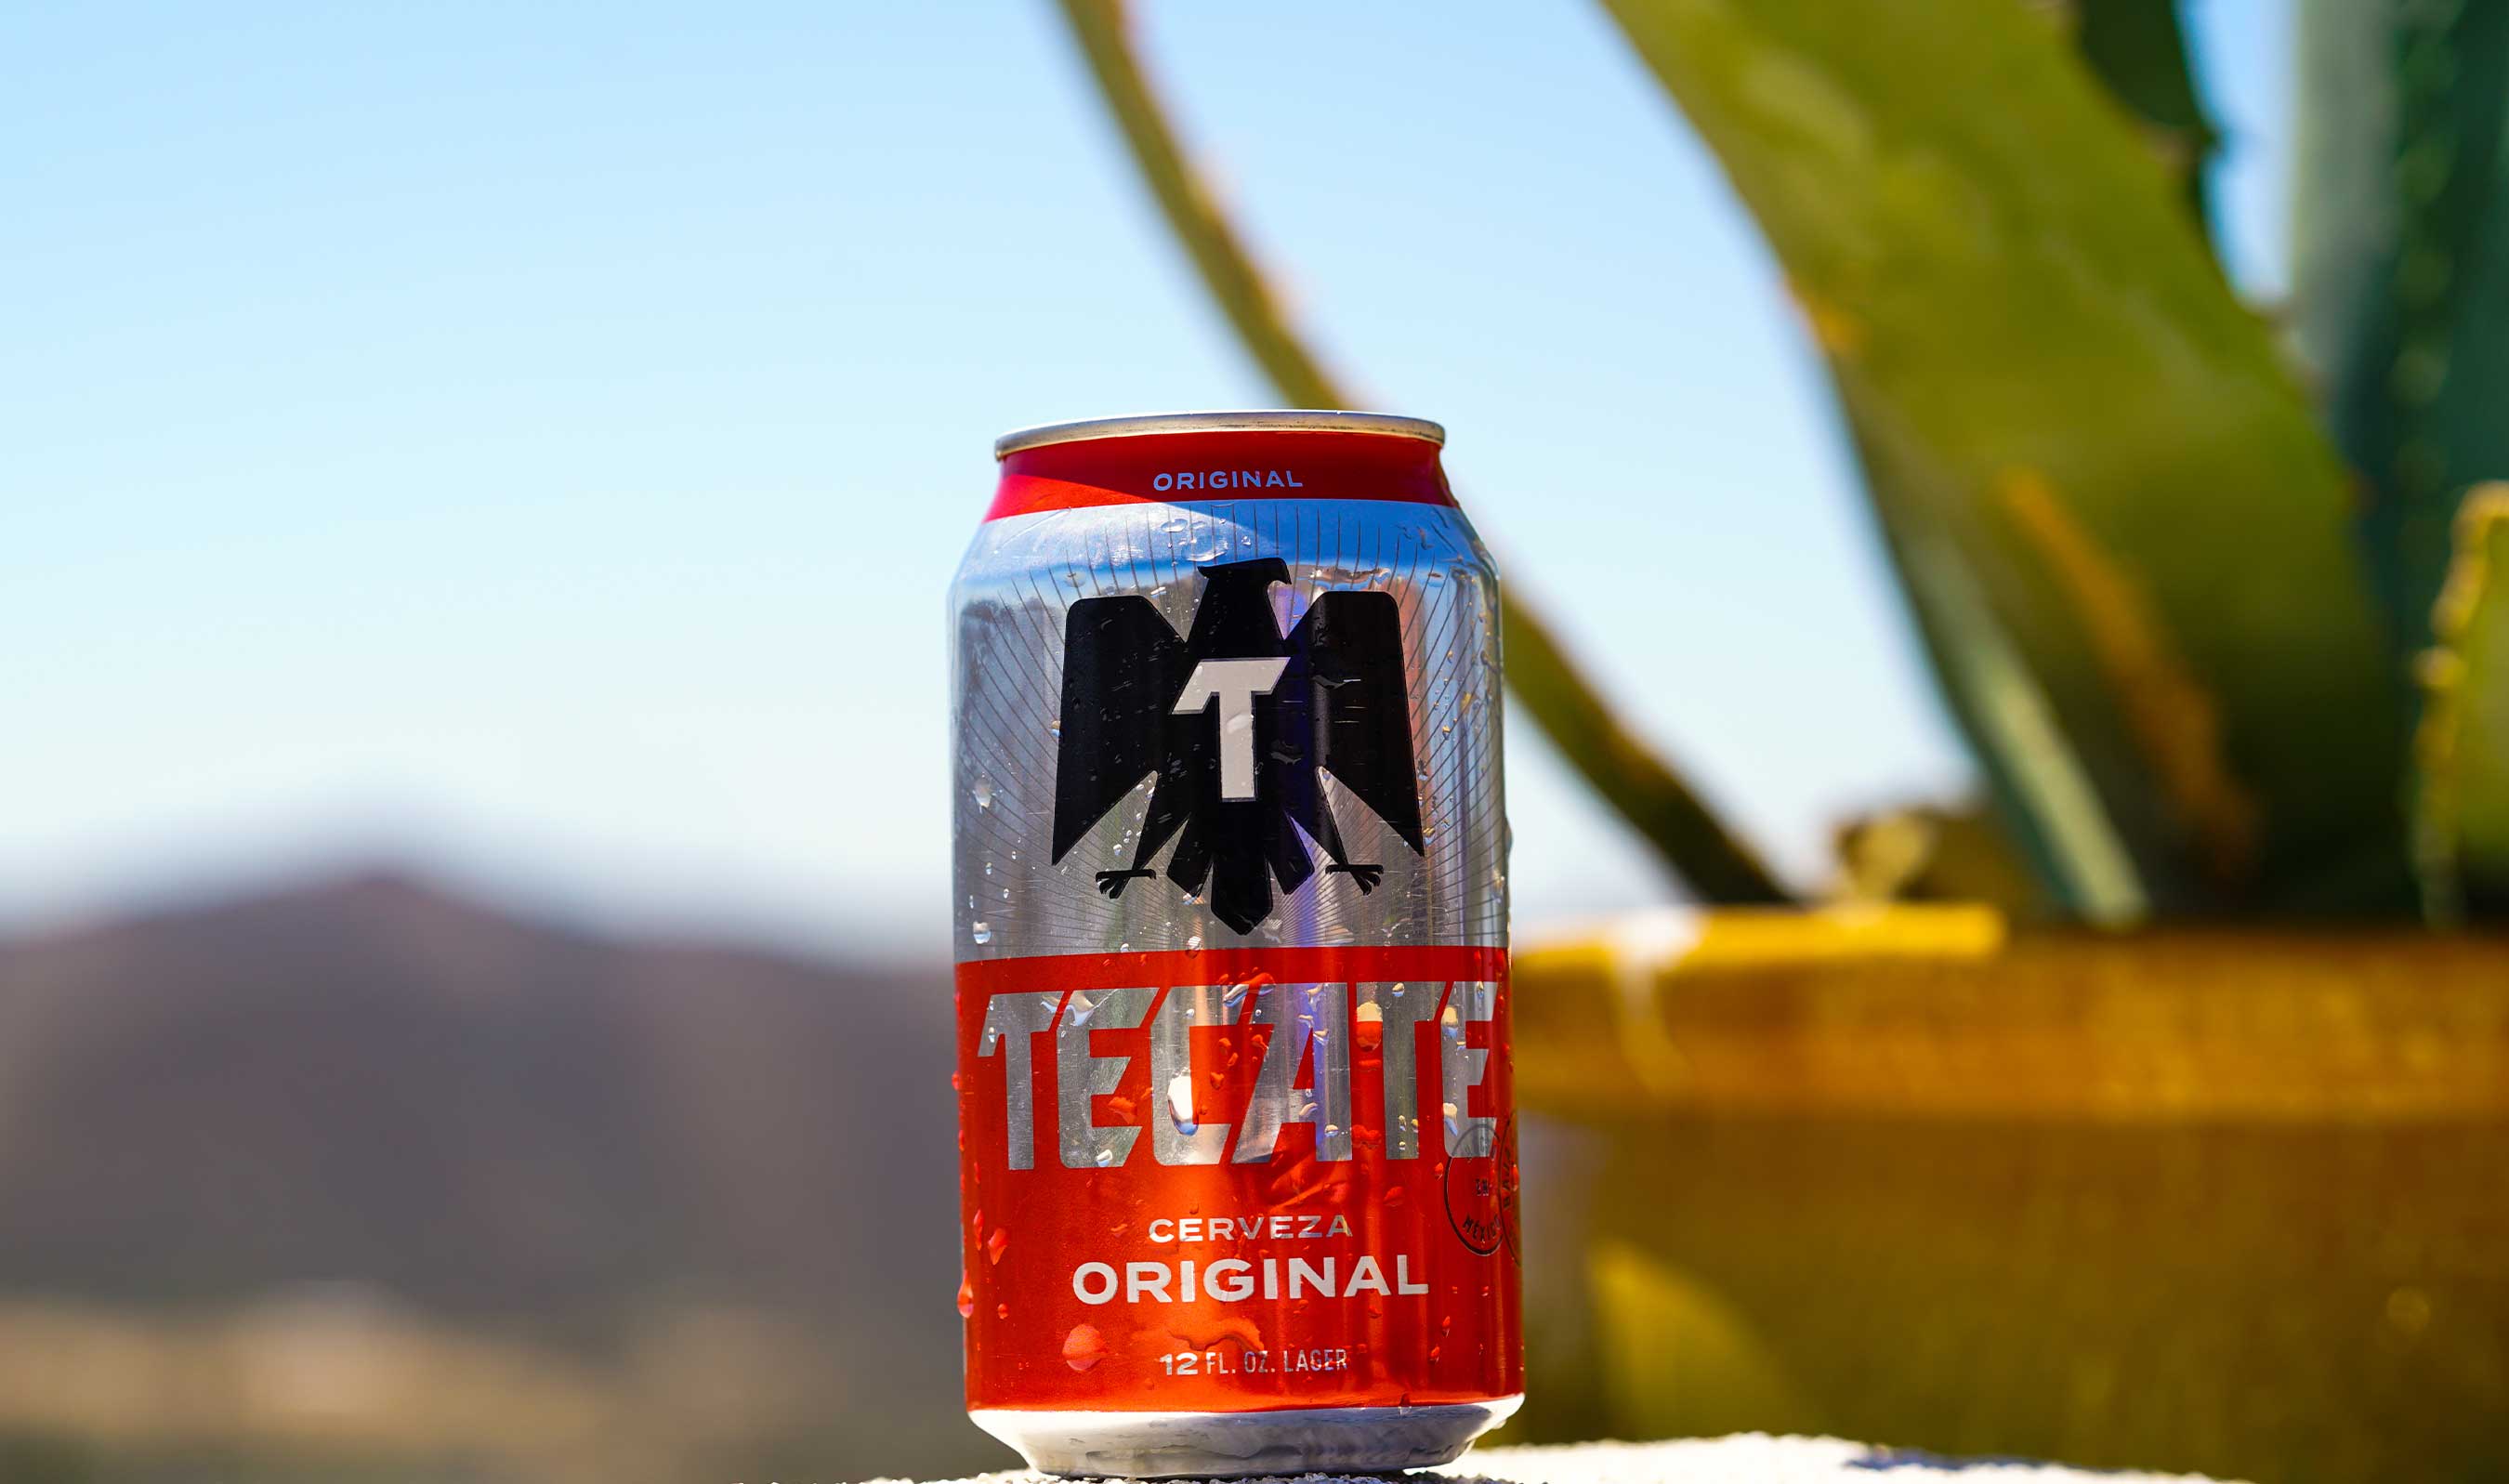 Tecate Original is a full-bodied lager with a refreshing crisp malt flavor and a pleasant aftertaste ? the way a Mexican cerveza should be.